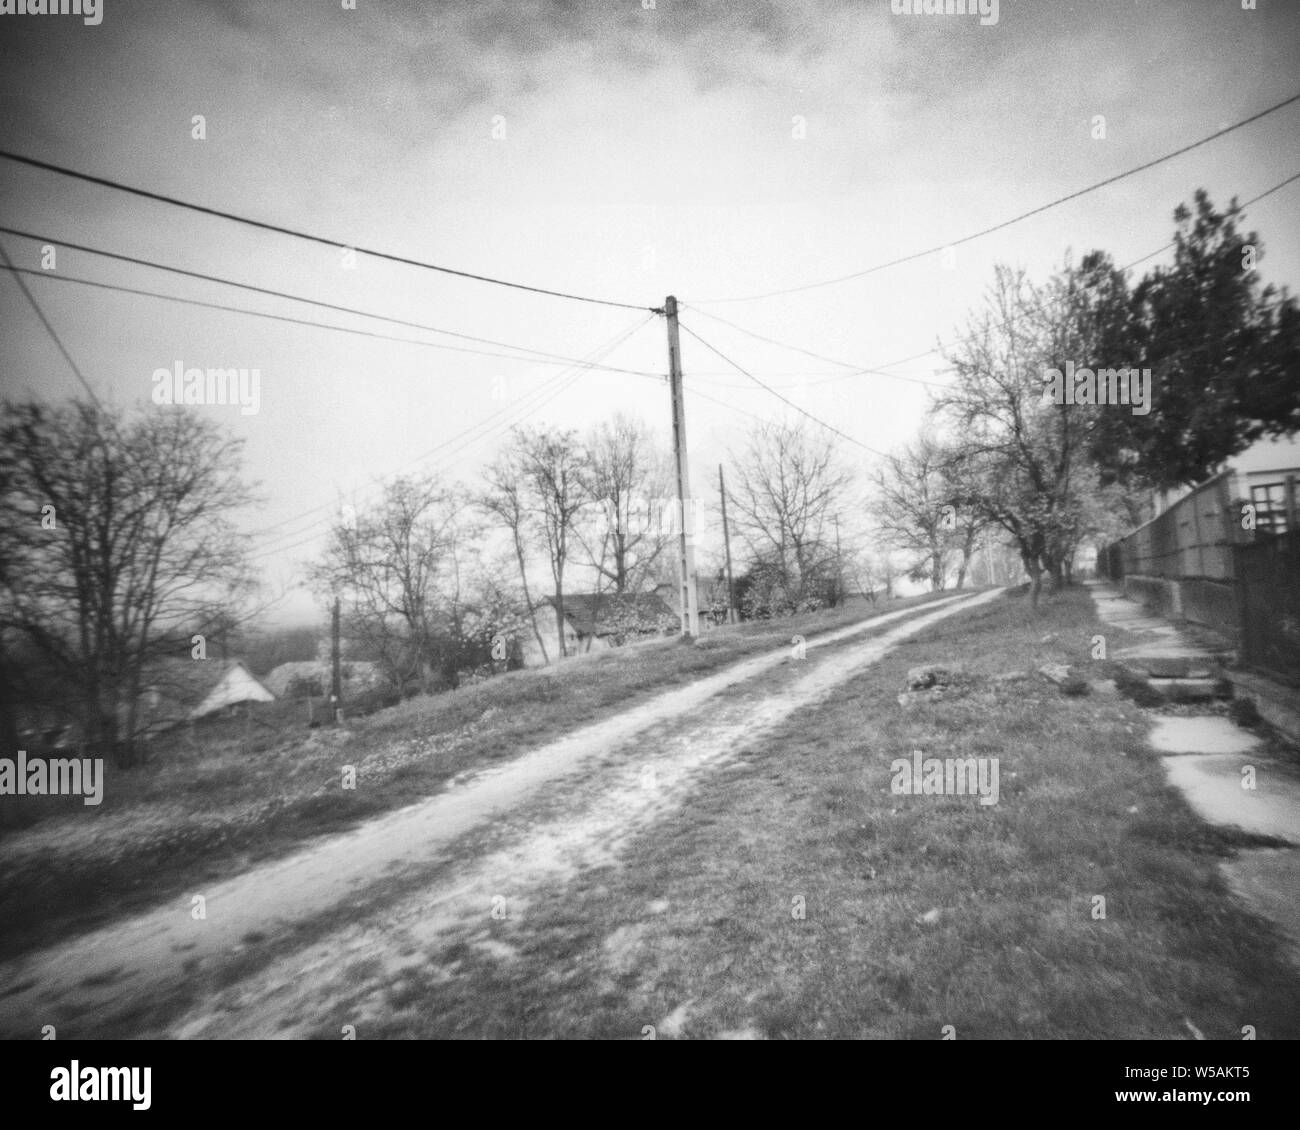 small road in a rural area, this black and white camera obscura photo is NOT sharp due to camera characteristic. Taken on analogue photographic large Stock Photo